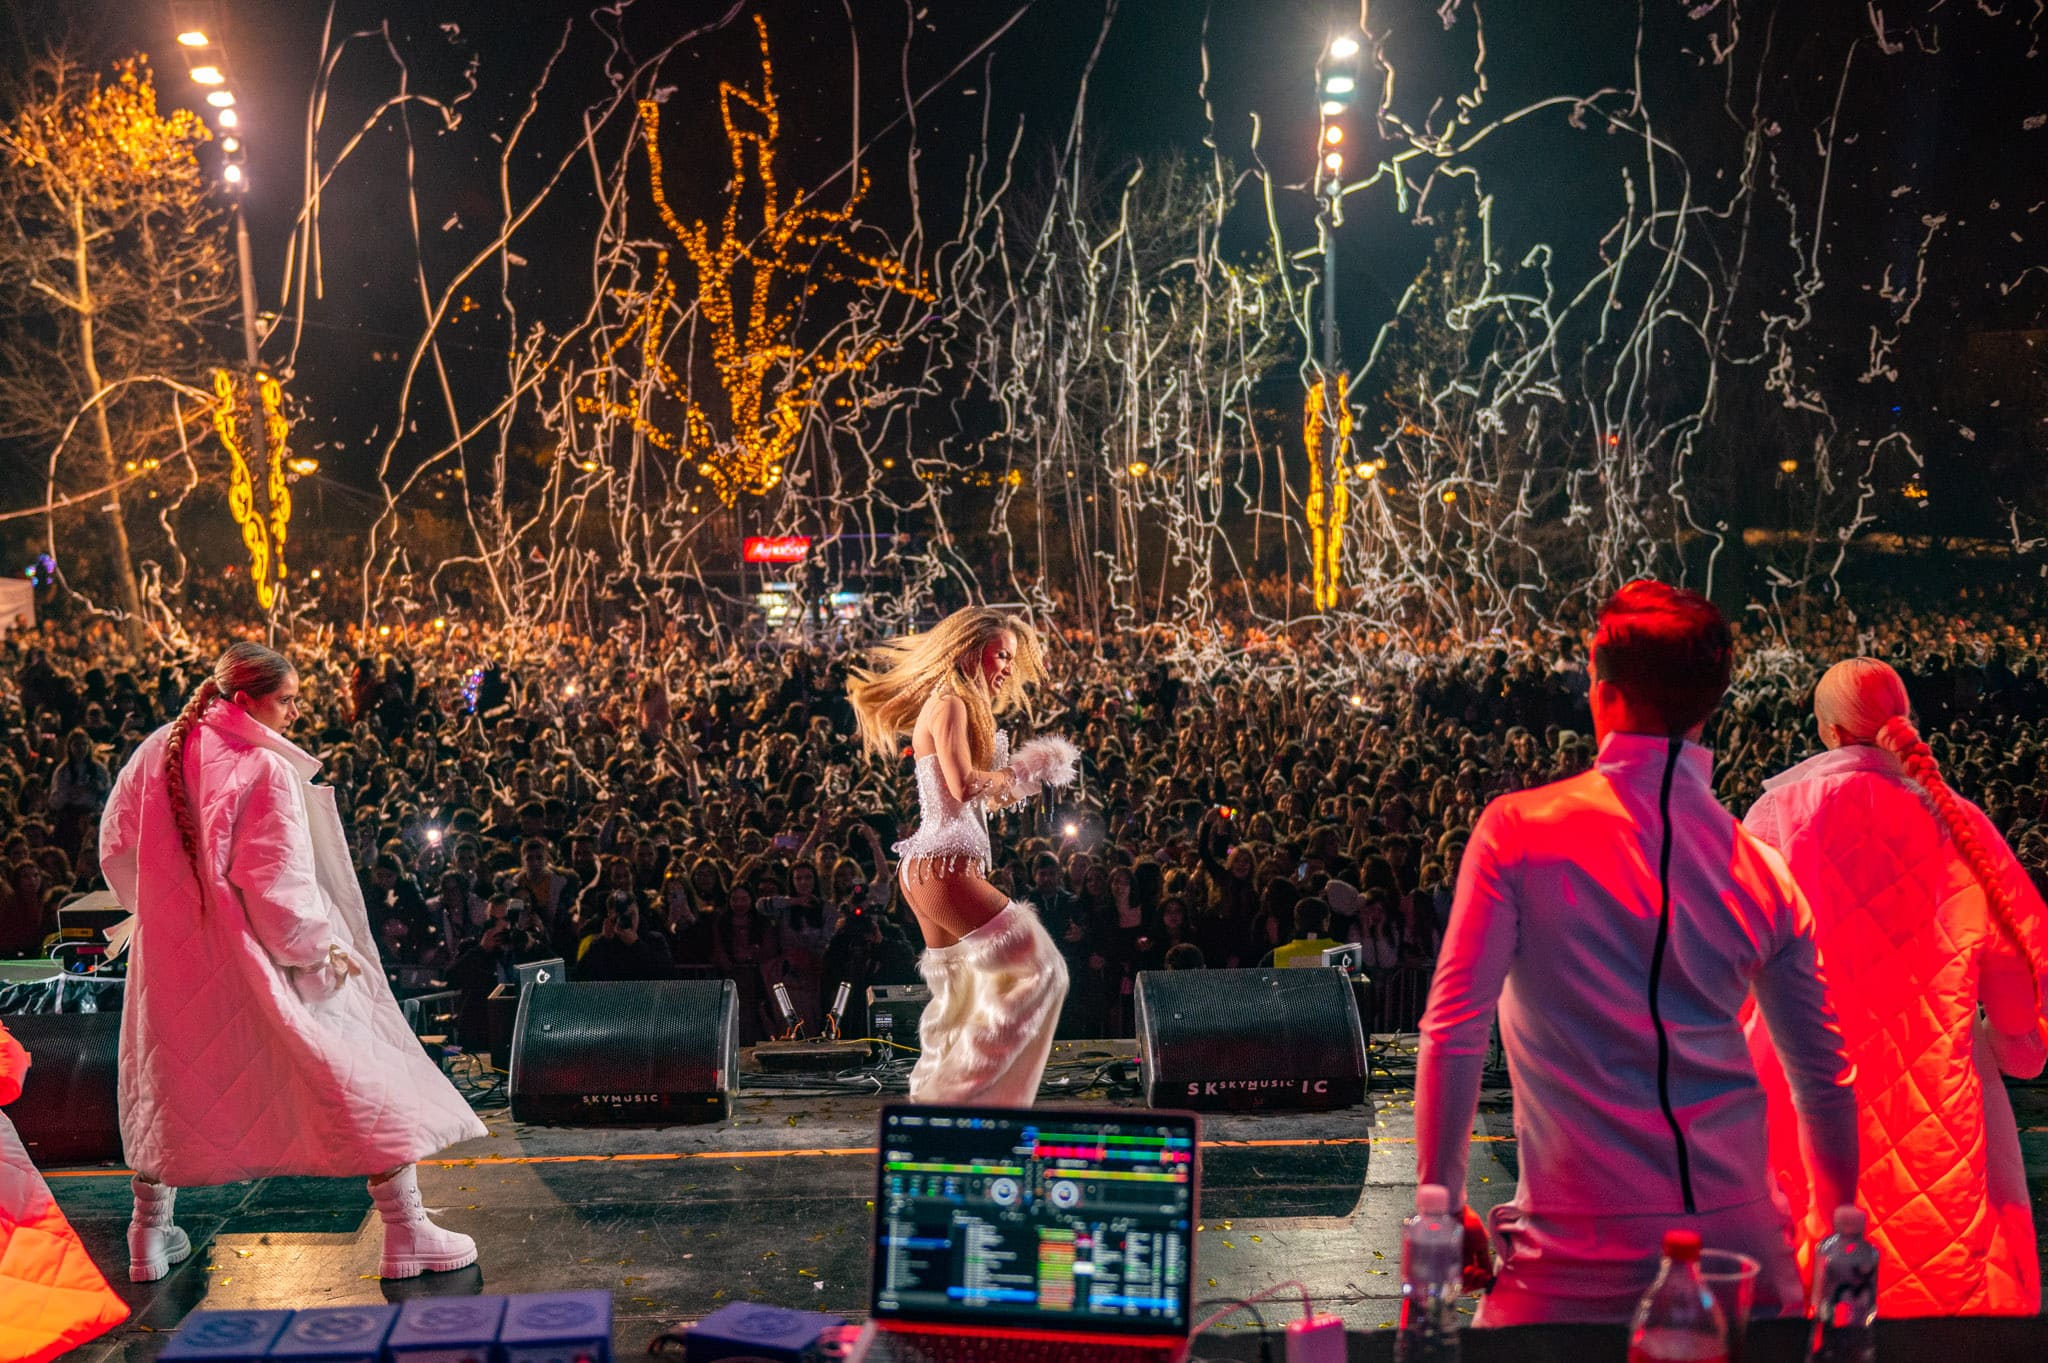 New Year's Eve in the capital, organized by Skymusic and the City of Belgrade